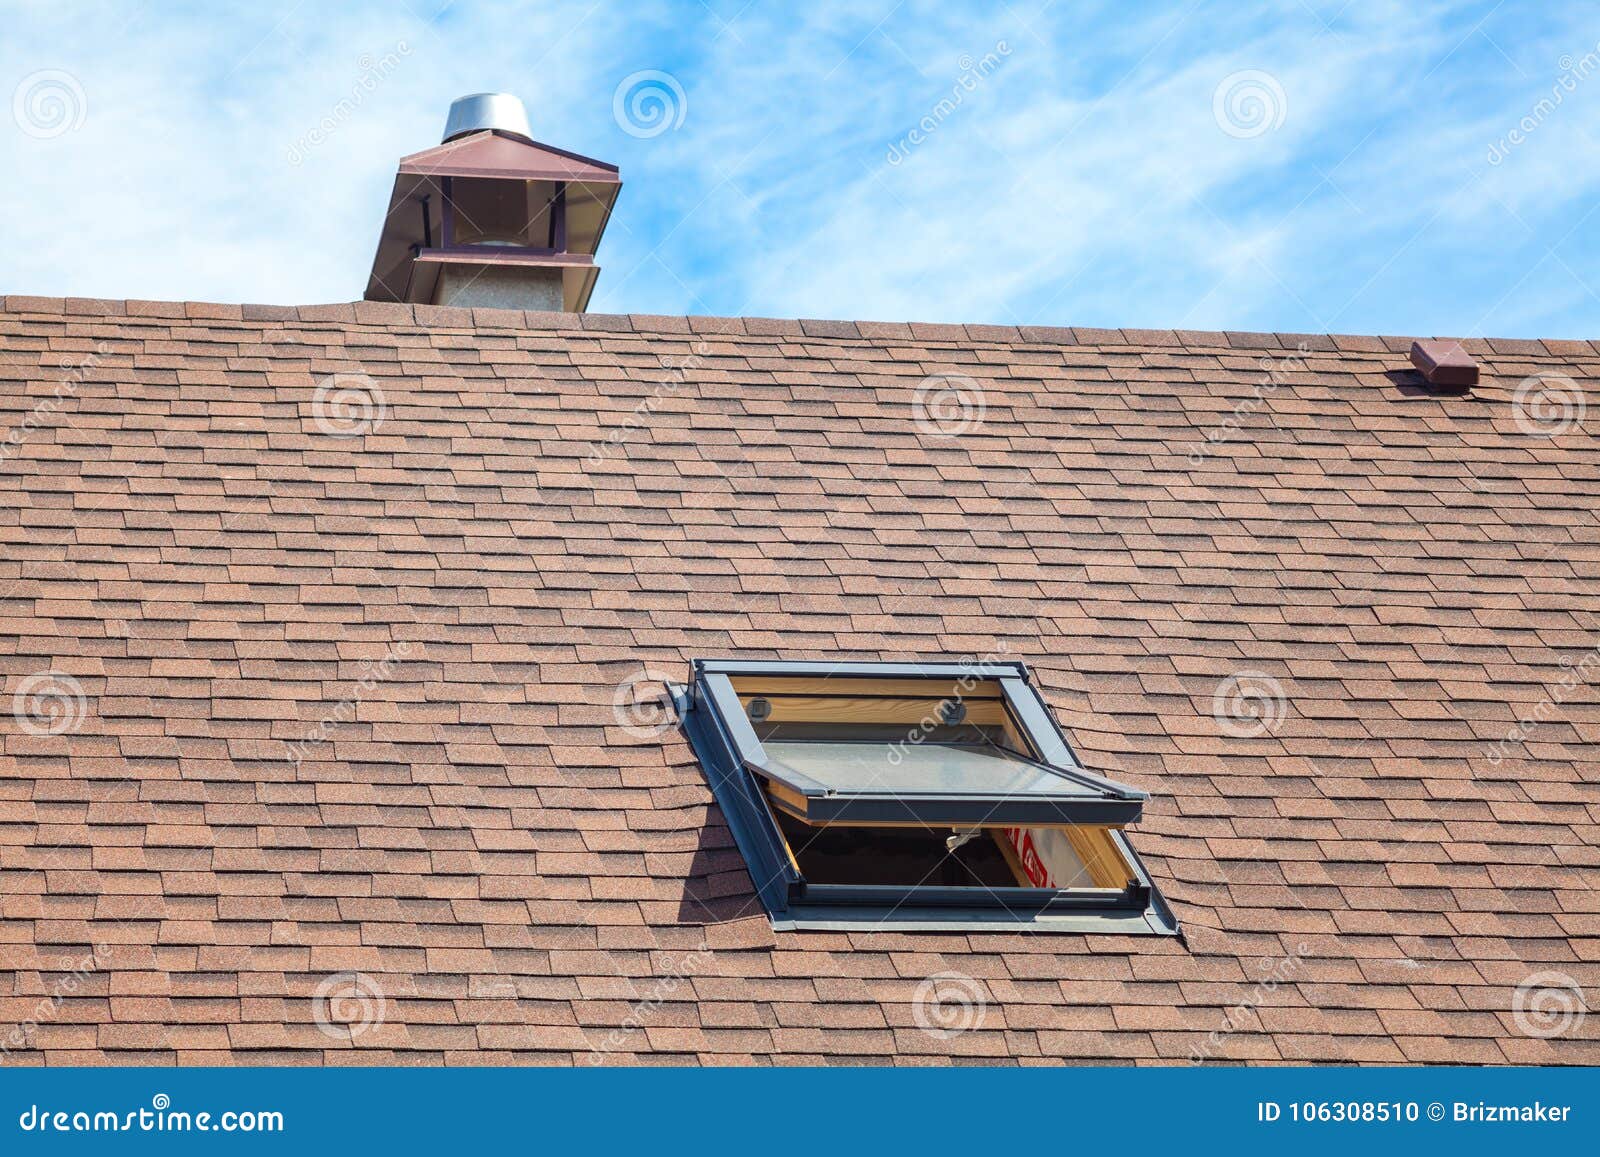 new roof with skylight, asphalt roofing shingles and chimney. roof with mansard windows